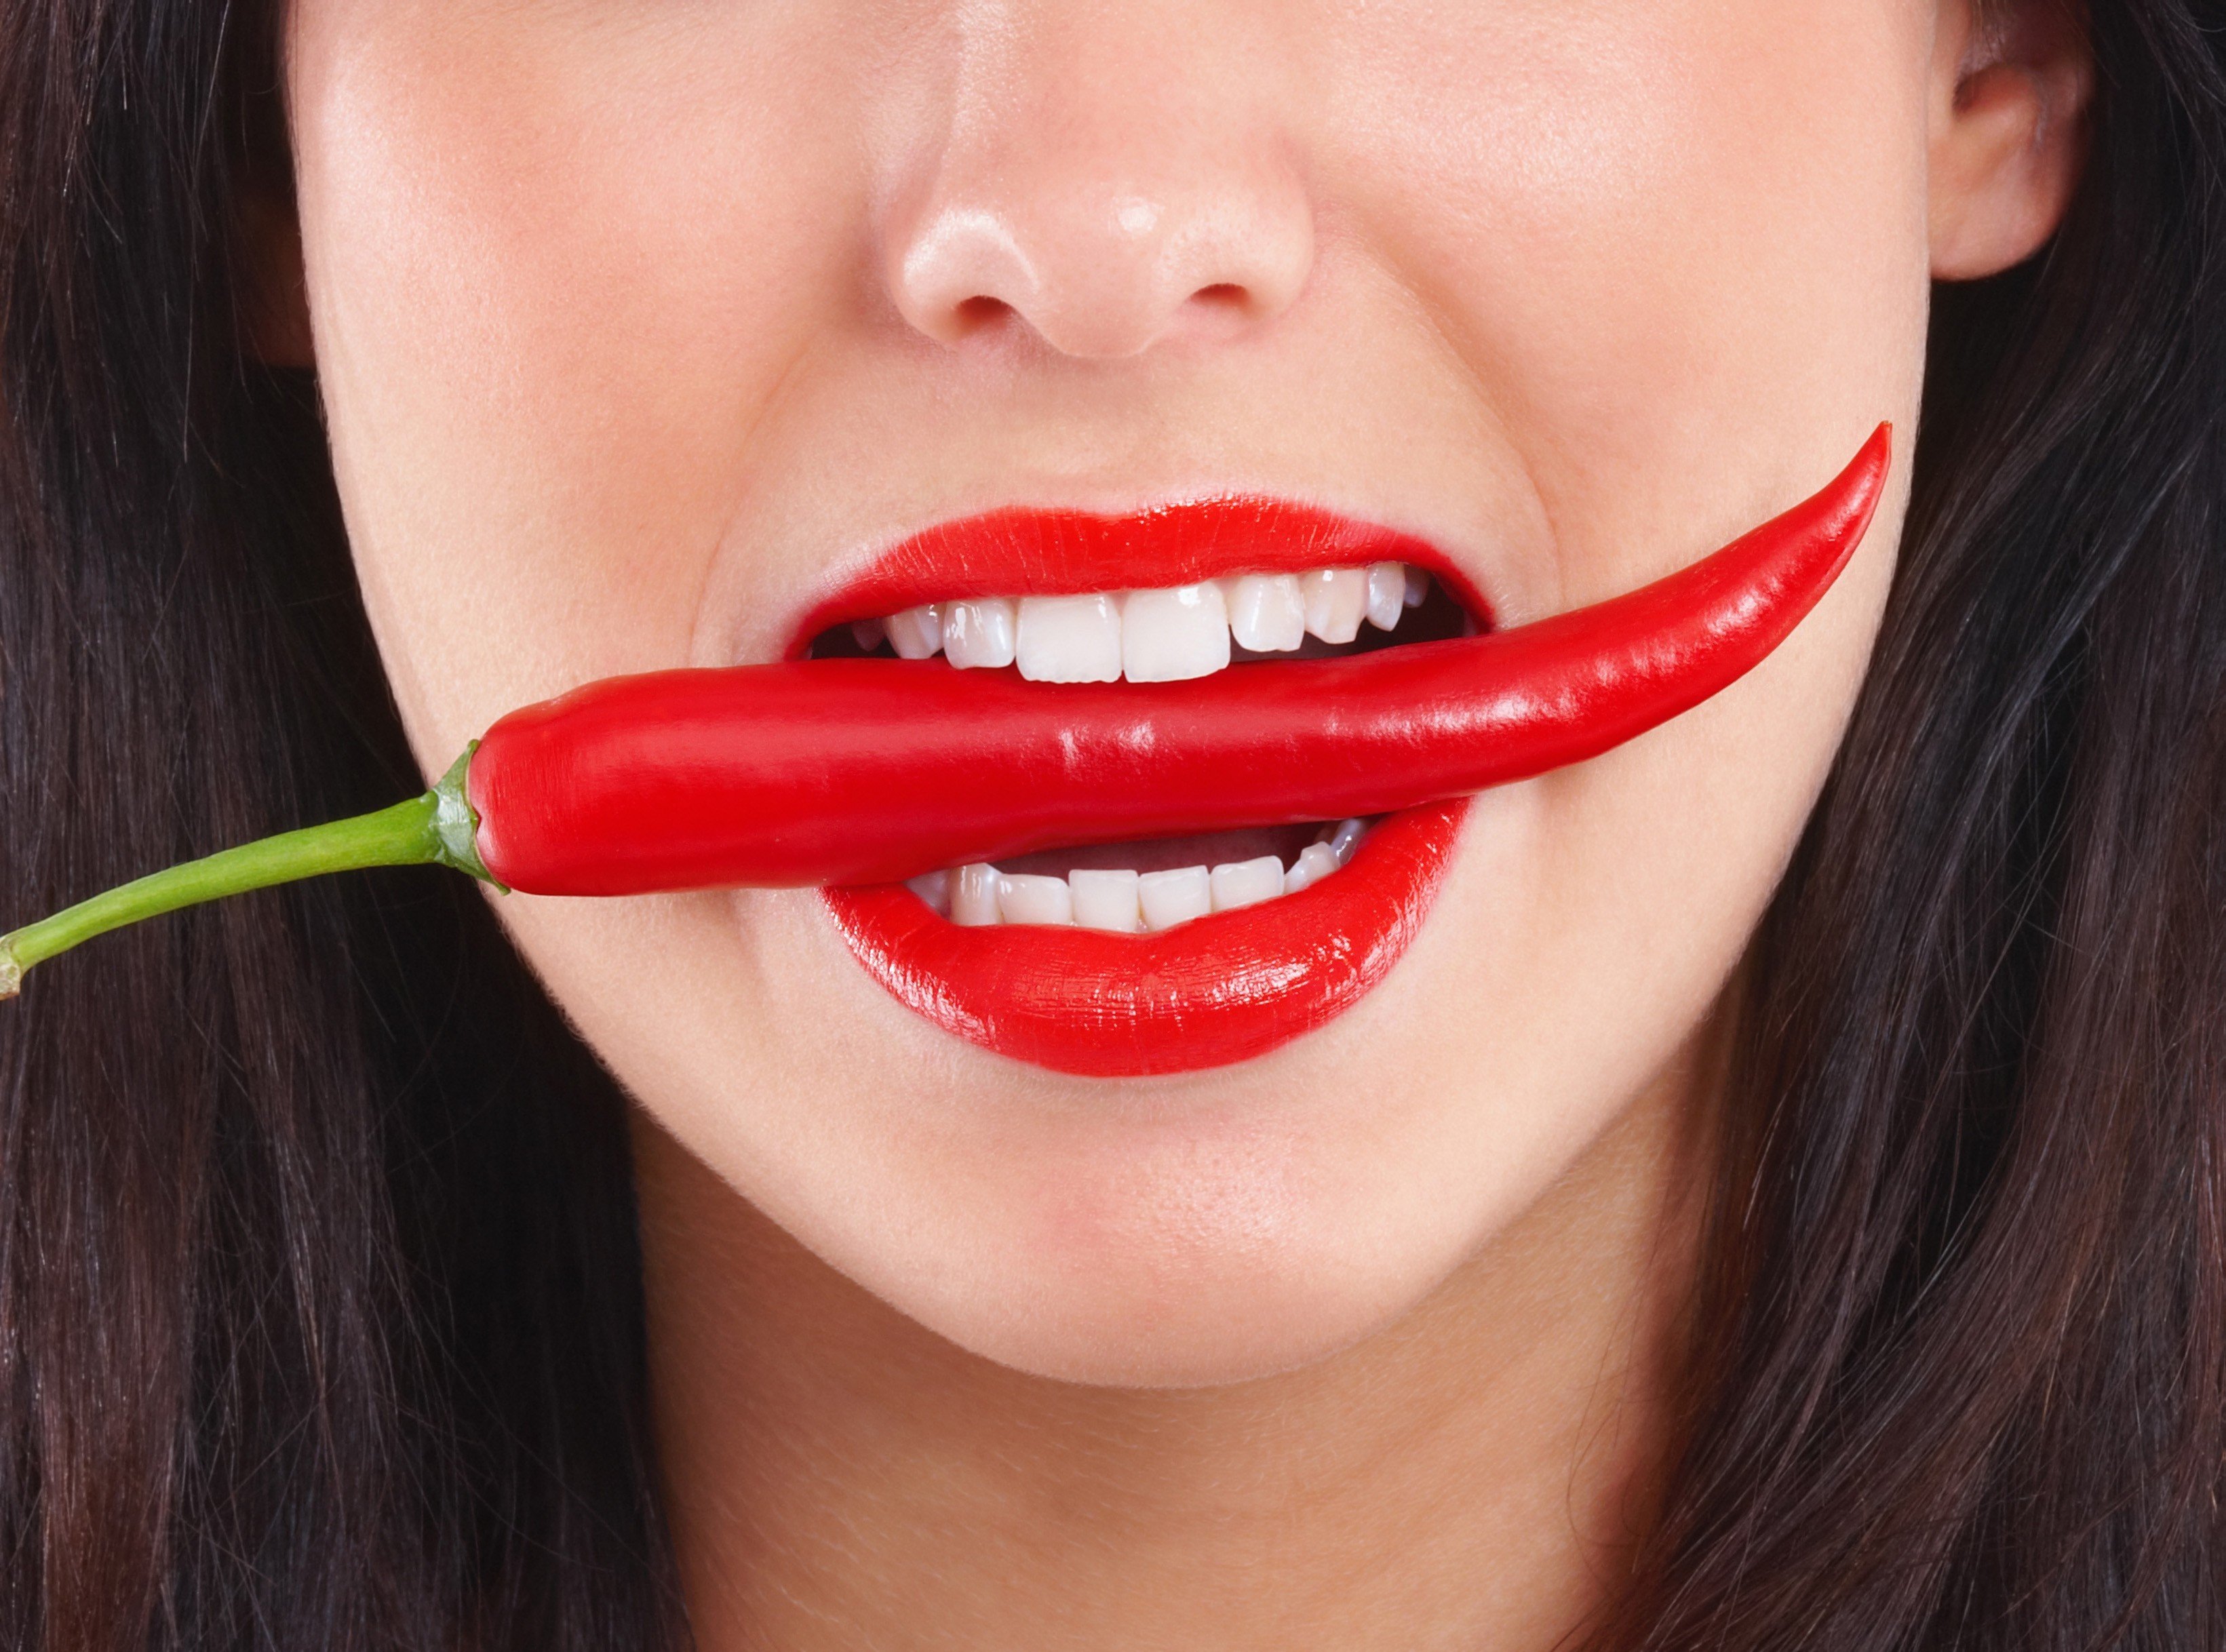 chilli peppers, Juicy lips Wallpaper